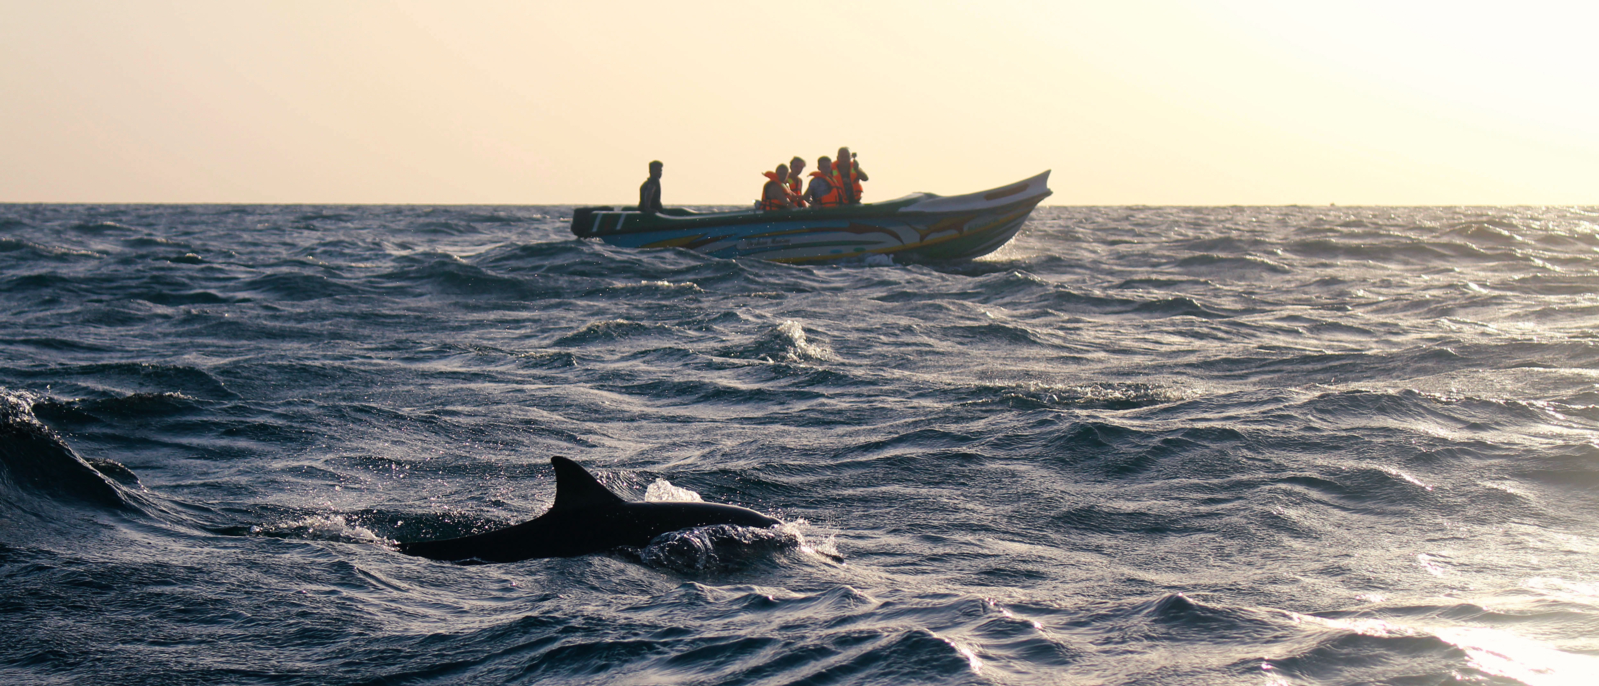 In search of the dolphins in Trincomalee. Taken in Sri Lanka, August 2018